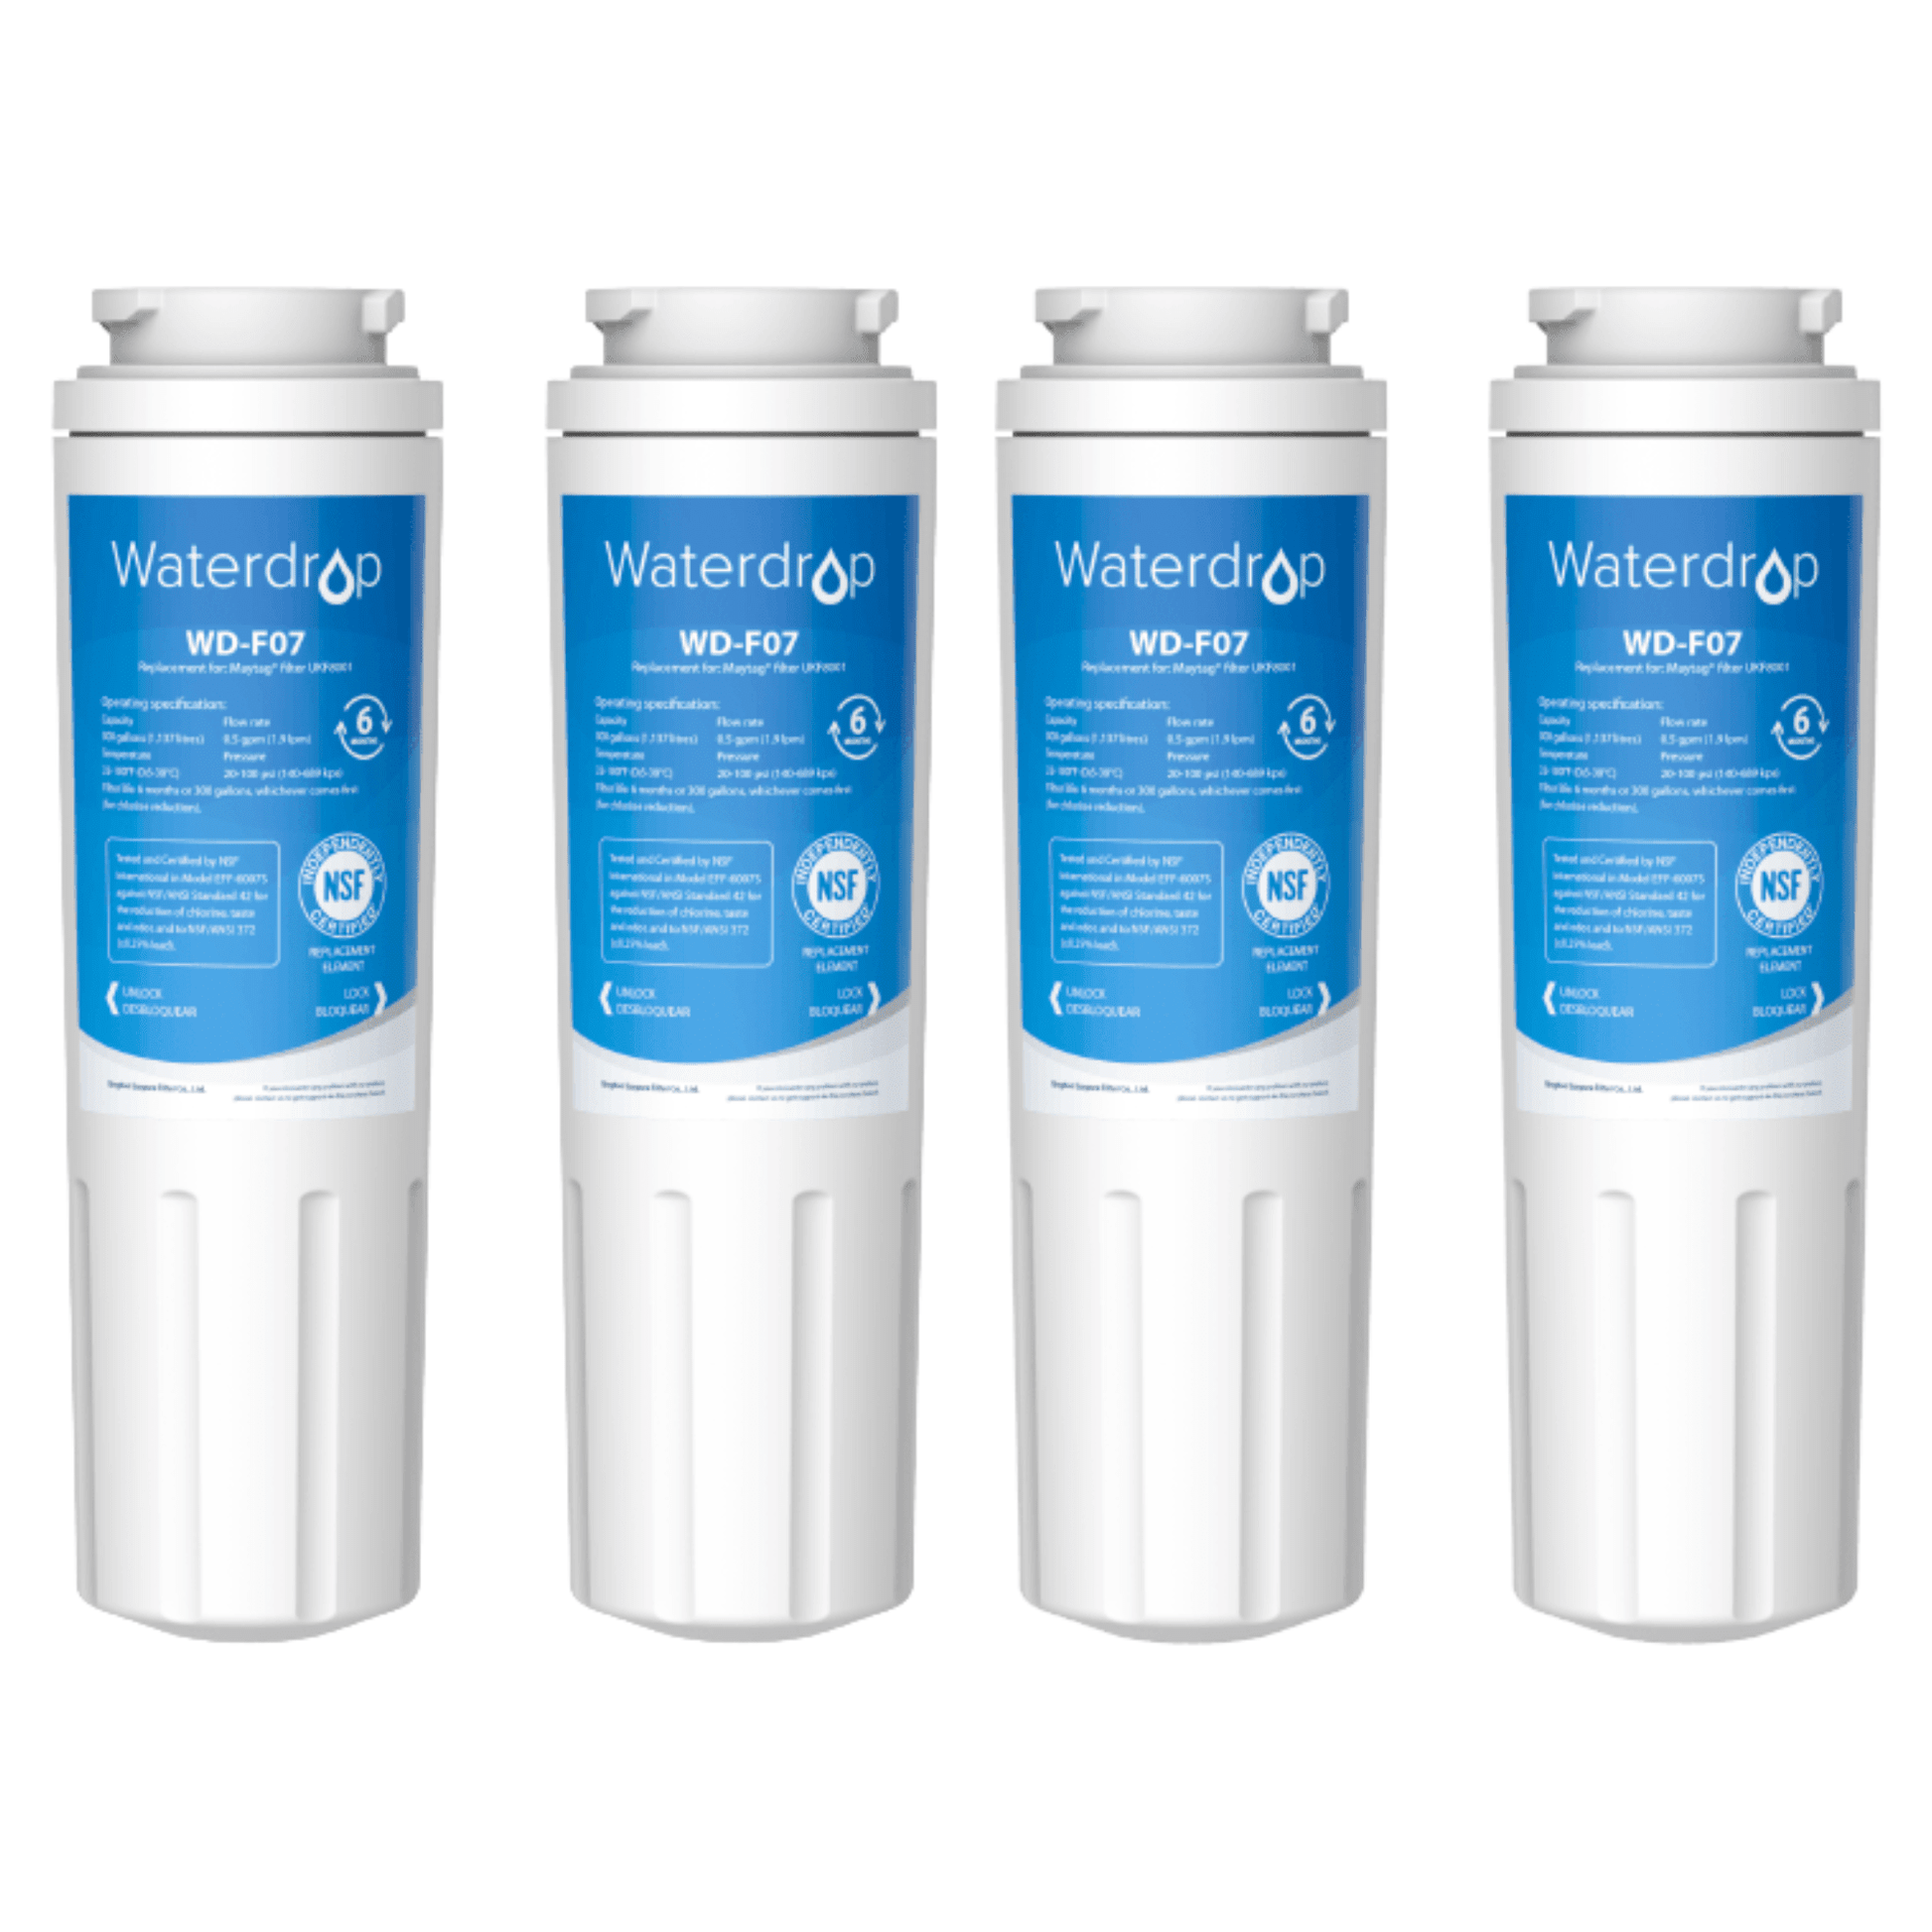 2-Pack Replacement for KitchenAid KBFS25EWMS Refrigerator Water Filter - Compatible with KitchenAid 4396395 Fridge Water Filter Cartridge